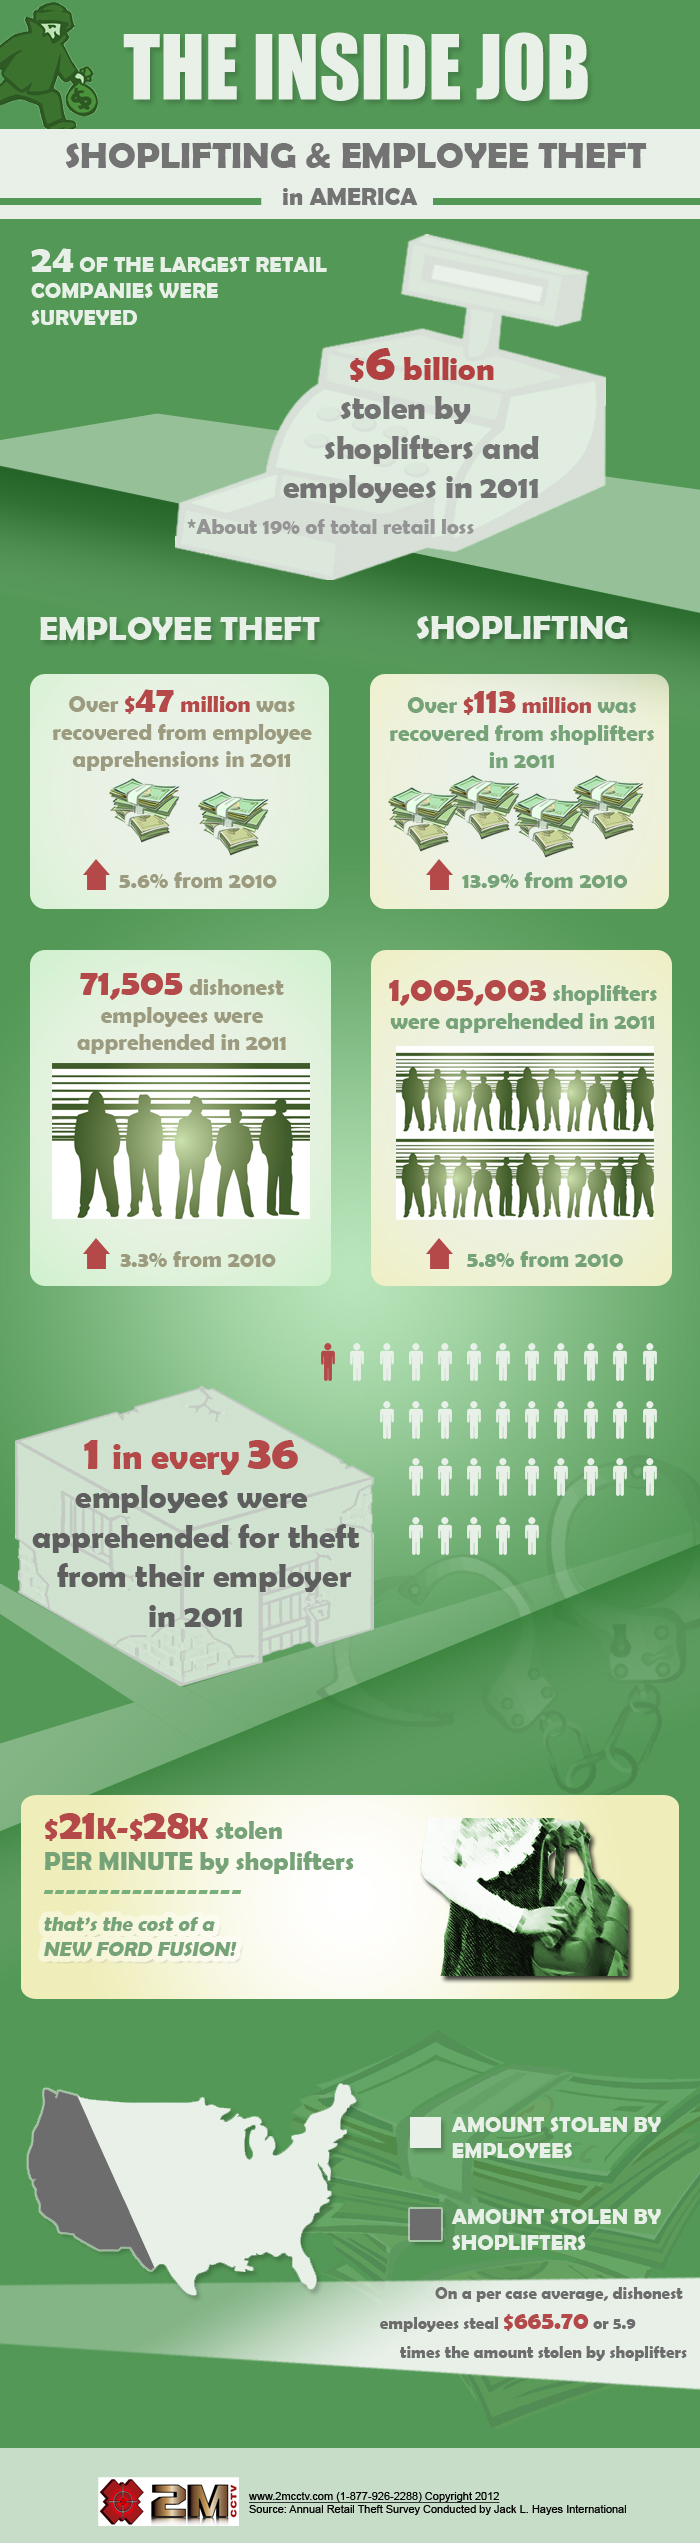 Shoplifting and Employee Theft in America